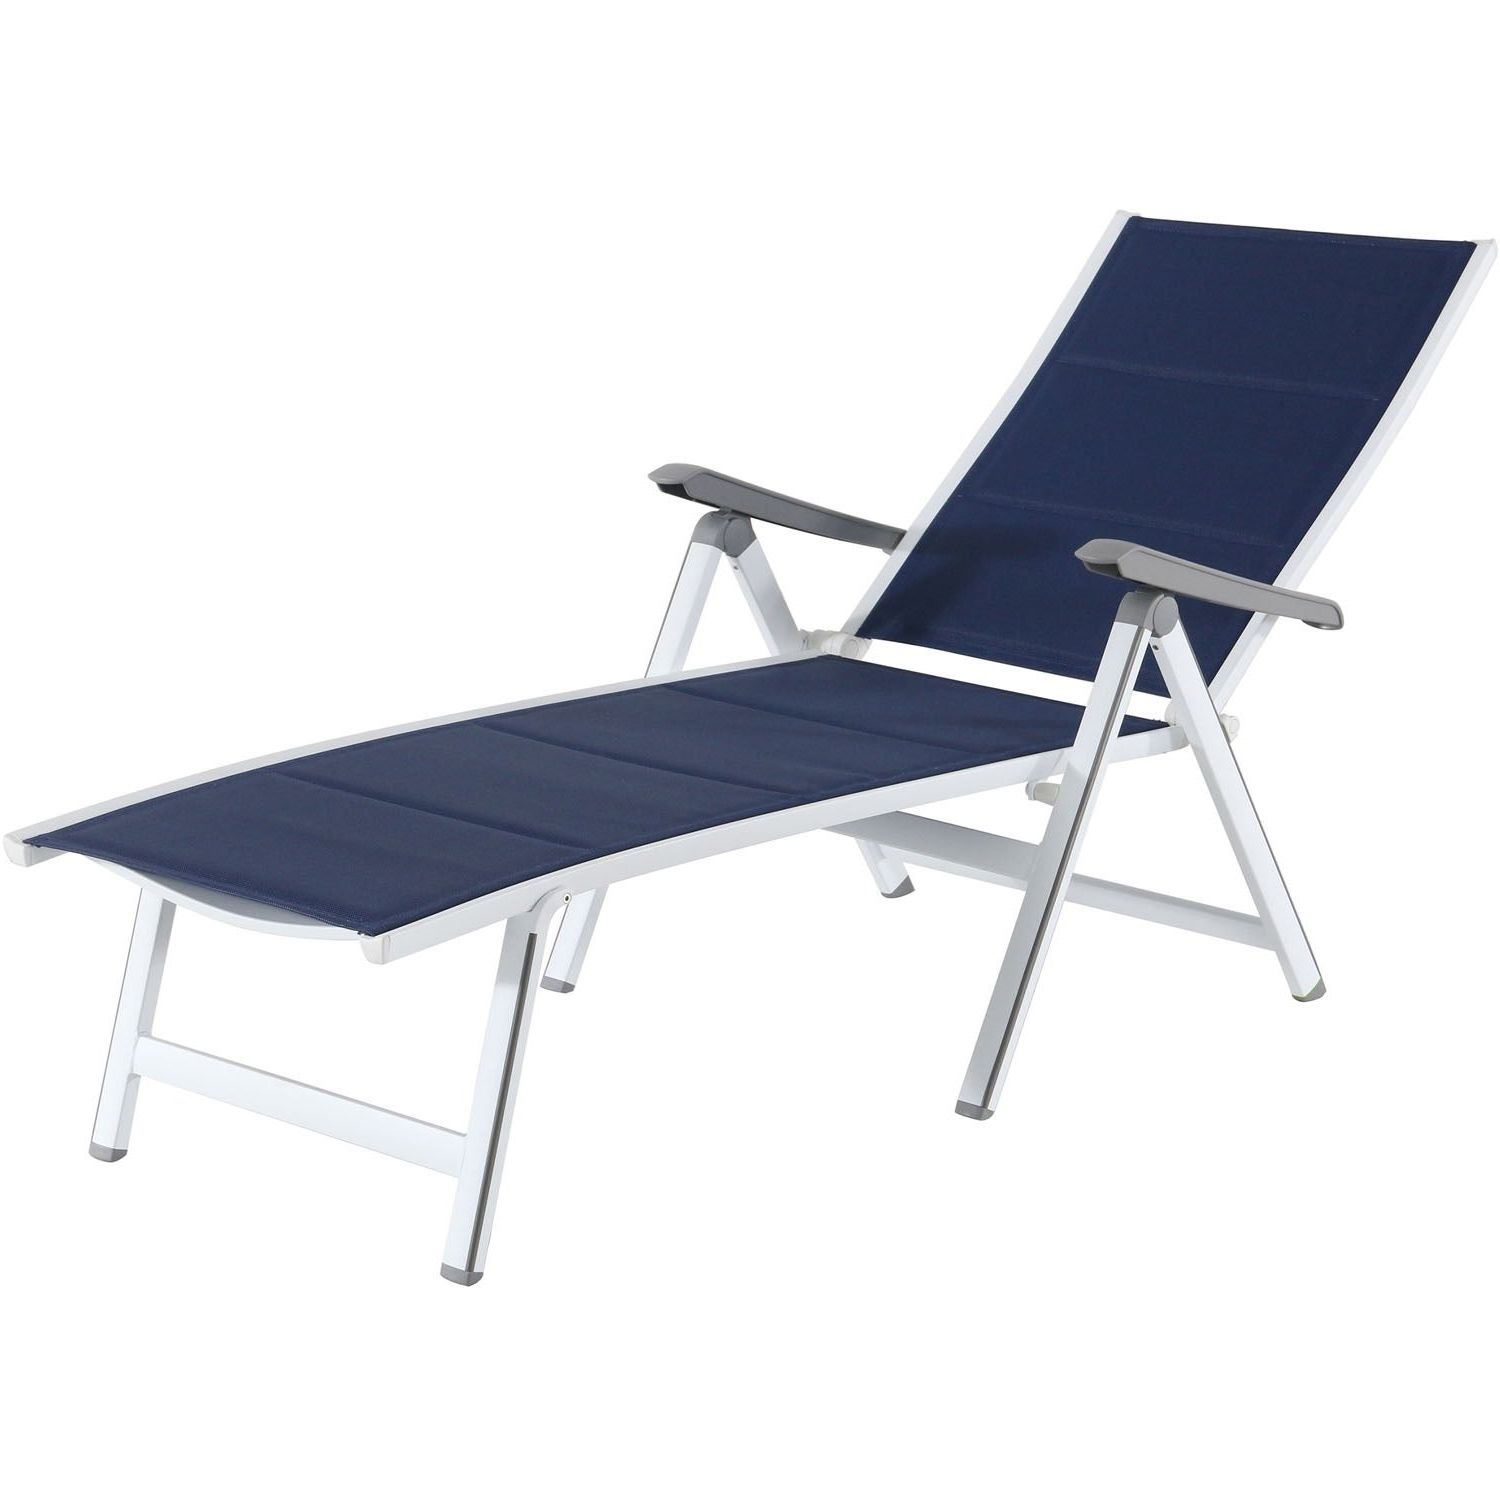 Hanover Halsted Padded Chaises With Regard To 2020 Hanover Regis White/navy Aluminum Padded Sling Chaise Lounge Chair (View 11 of 25)